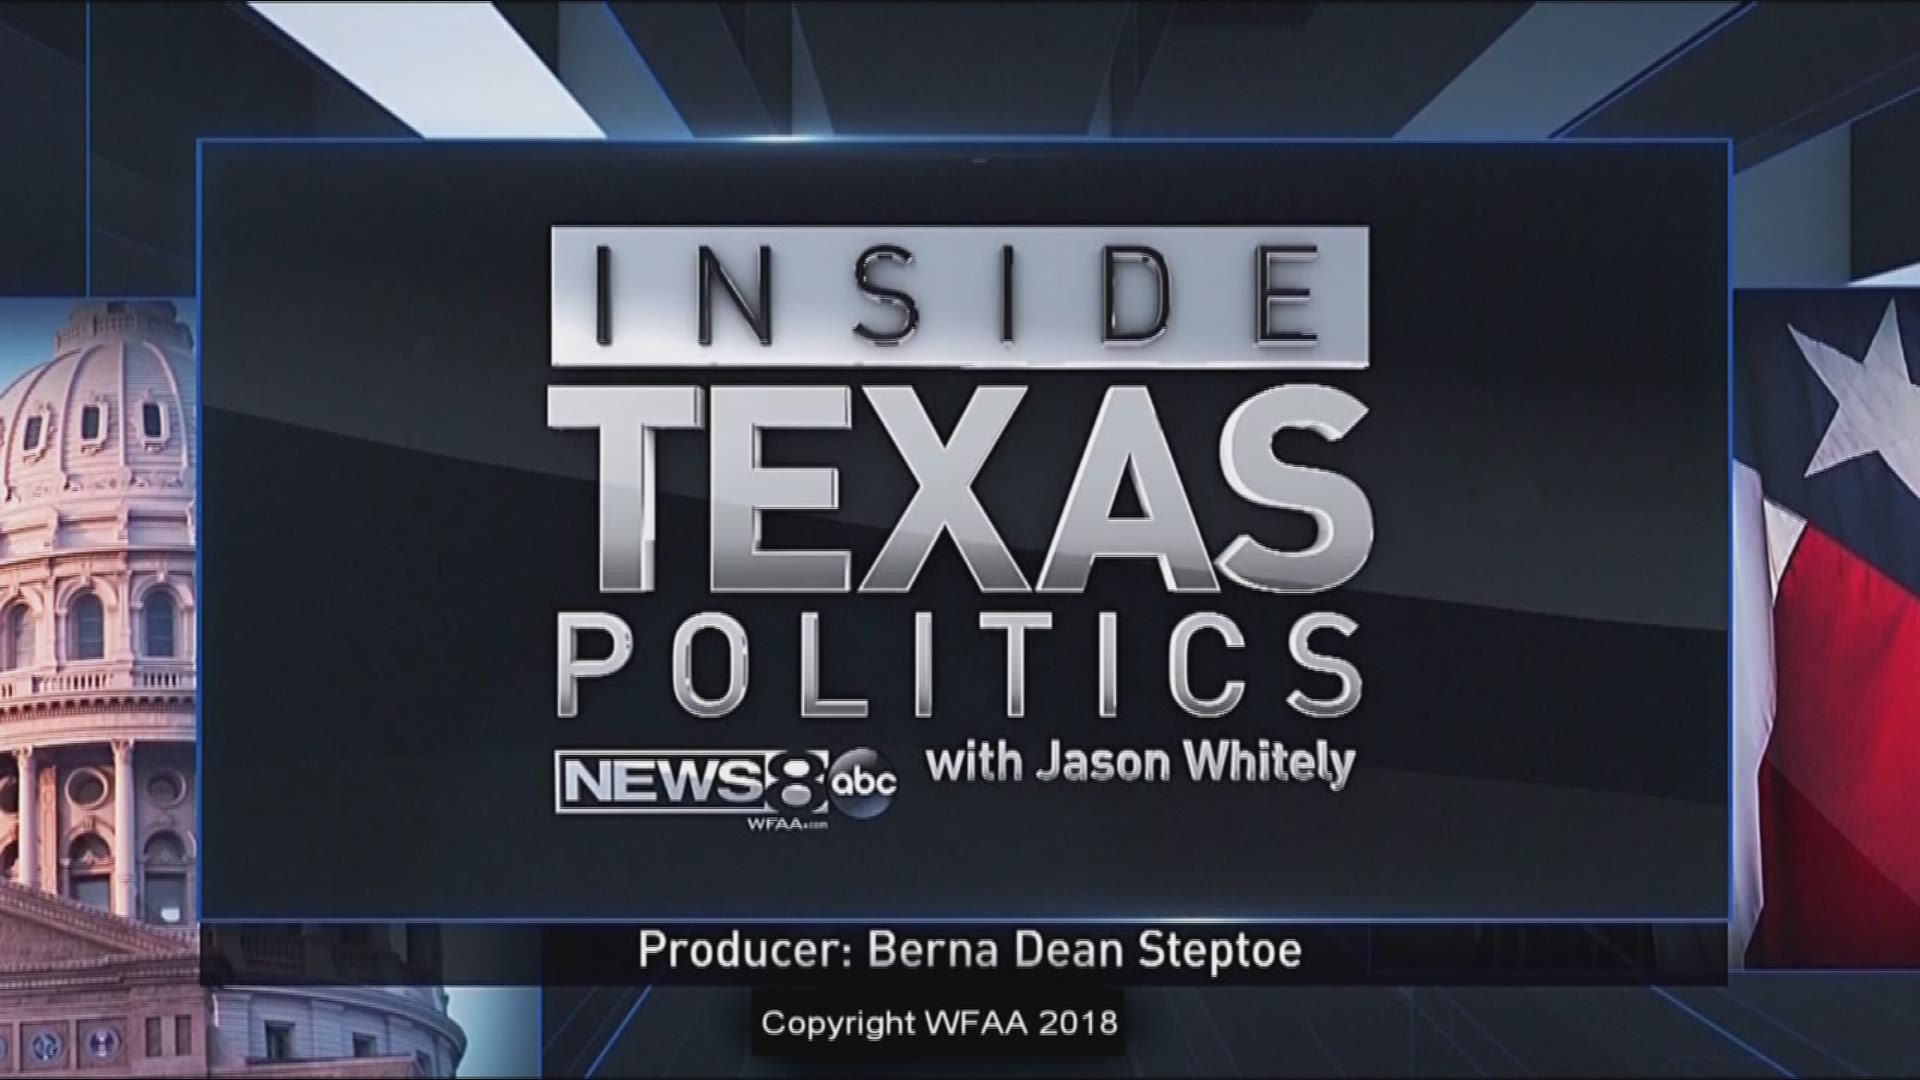 Republican State Rep. Matt Krause from Waco joined Inside Texas Politics to discuss both national and local politics. He did something Republicans rarely do - question President Donald Trump's actions. Rep. Krause claimed President Trump is going too far 